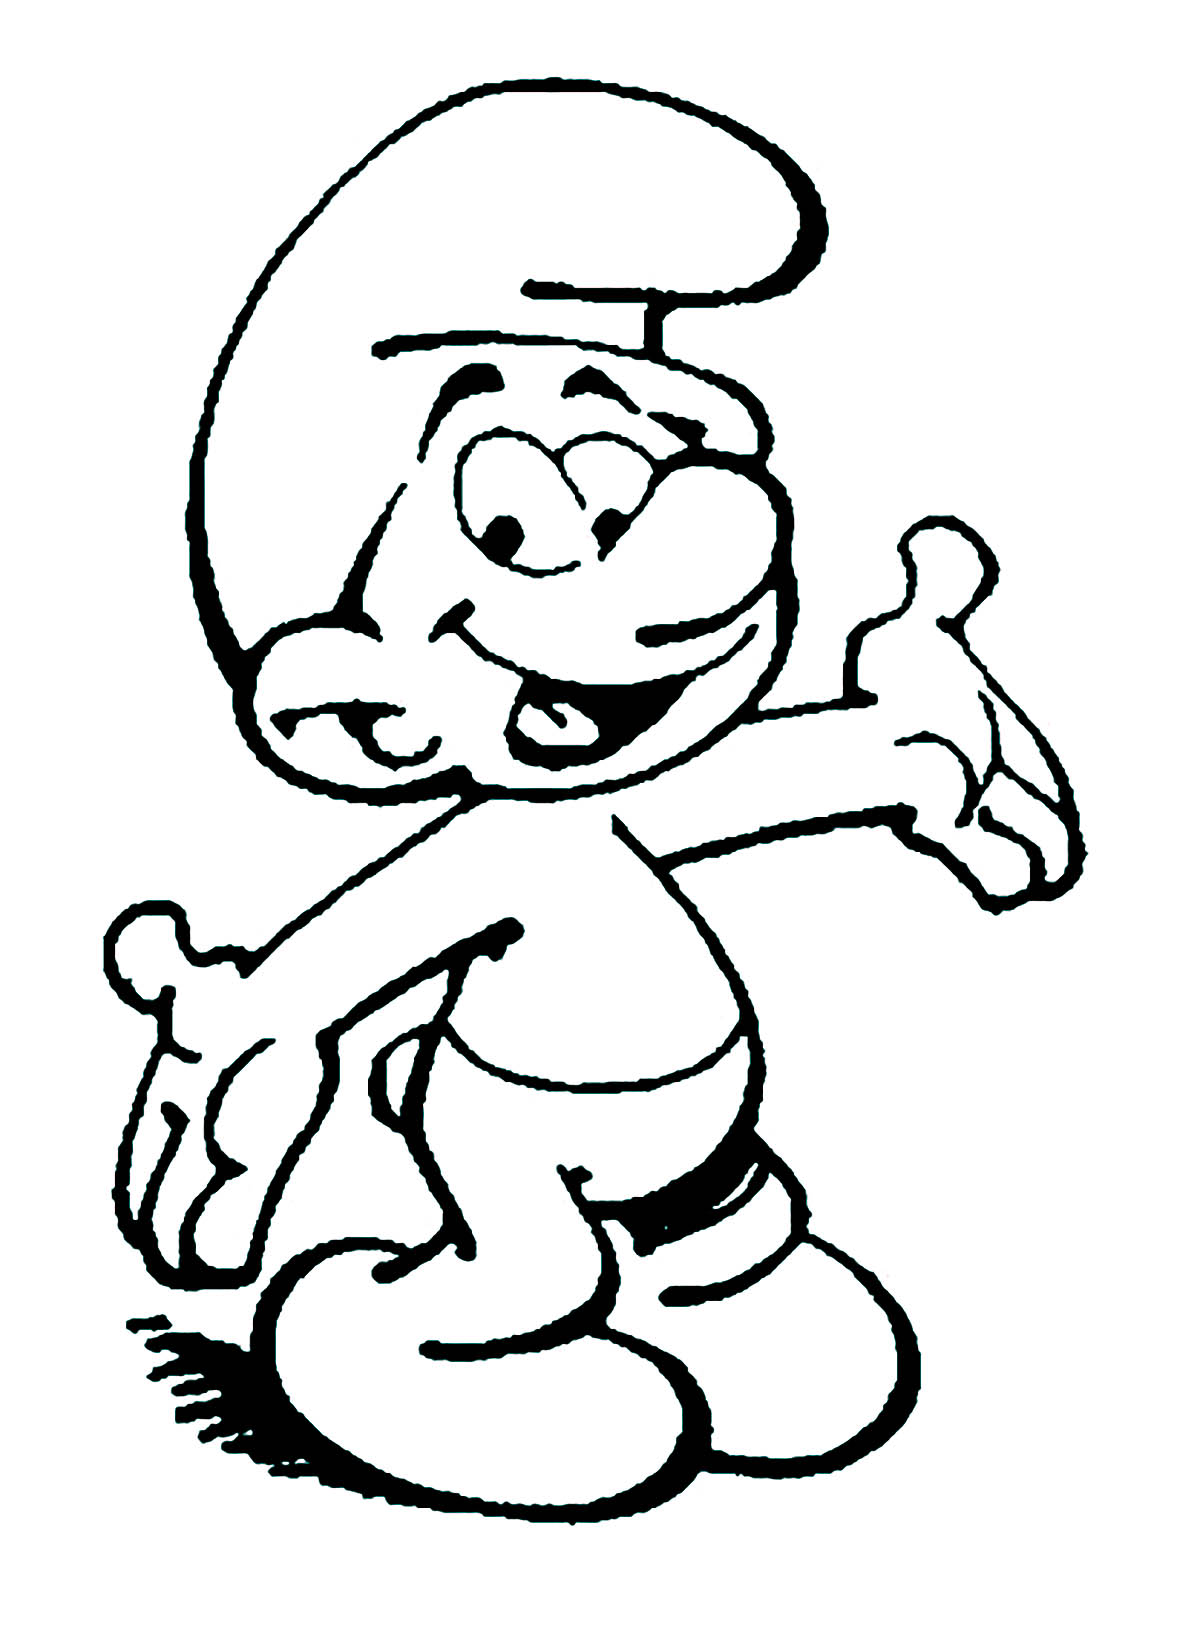 Happy Smurfs coloring page. - The Smurfs Kids Coloring Pages